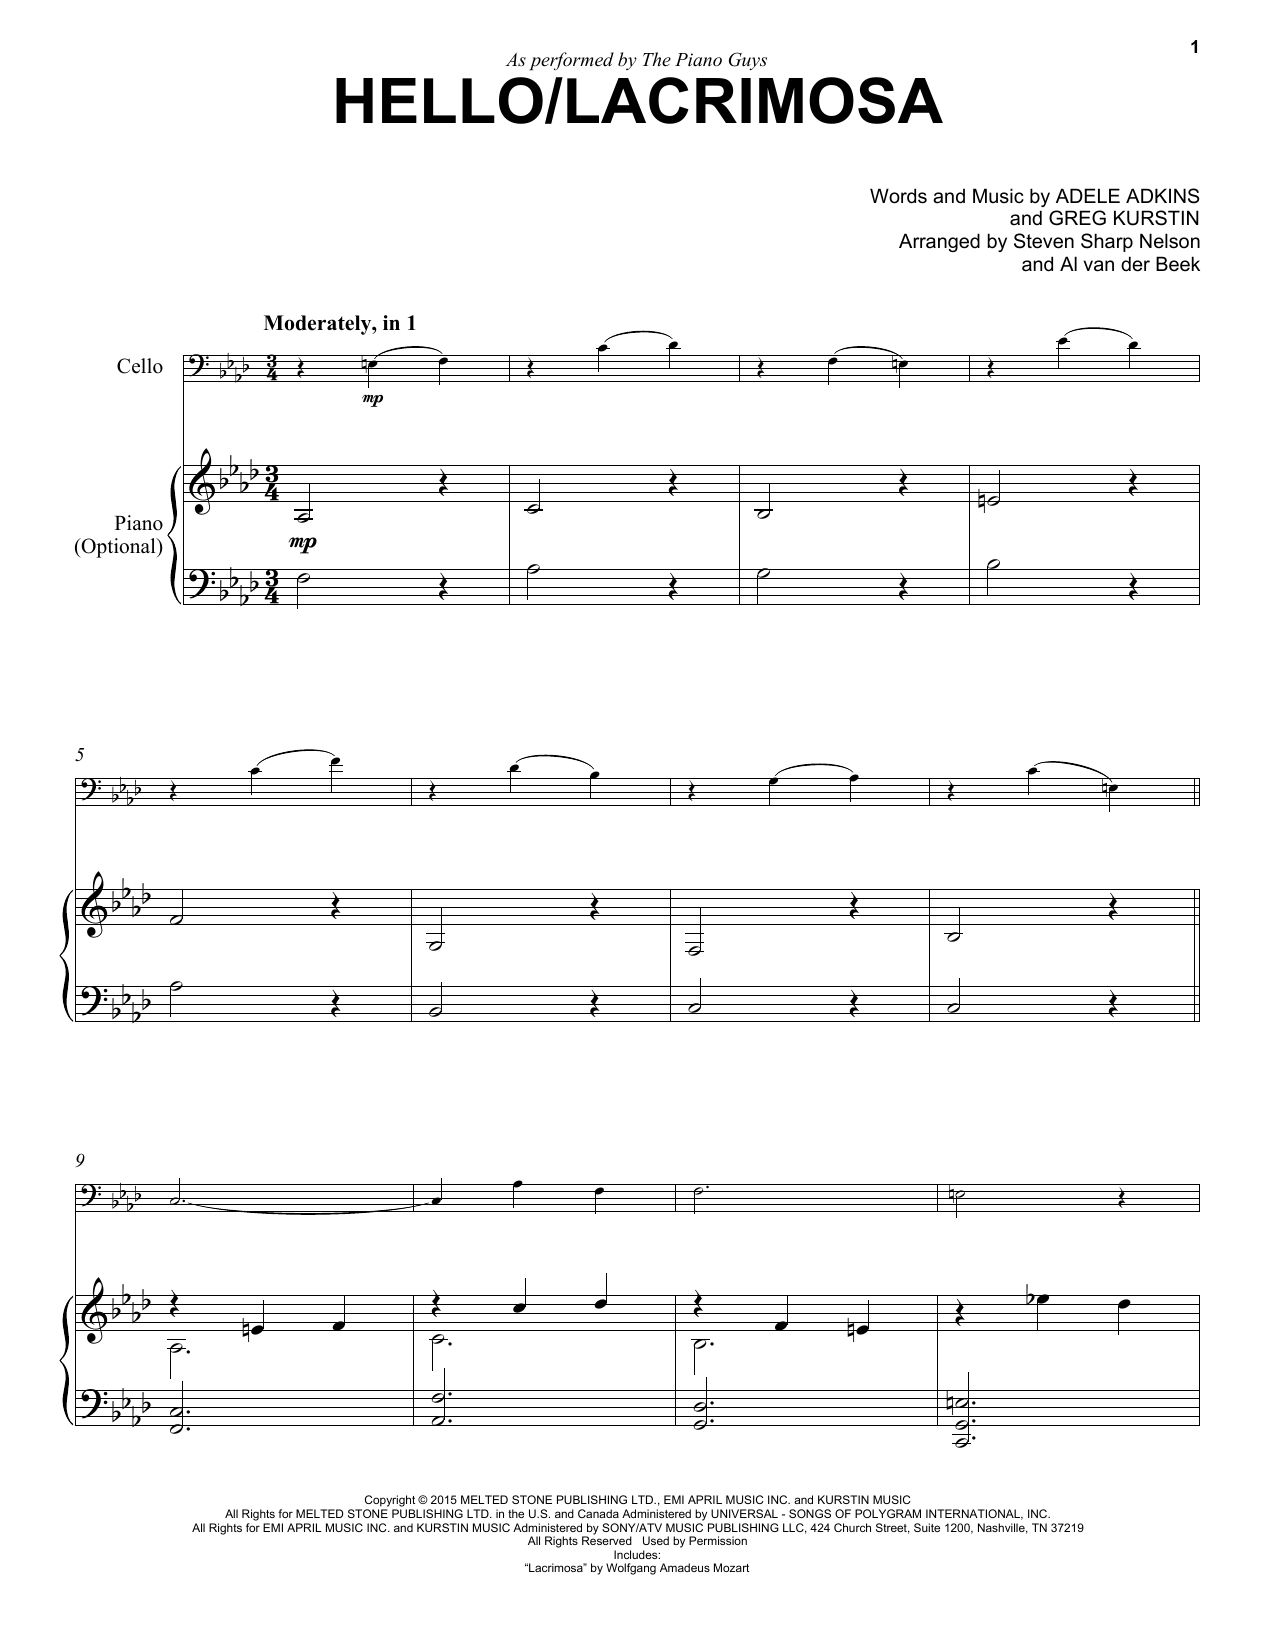 Download The Piano Guys Hello/Lacrimosa Sheet Music